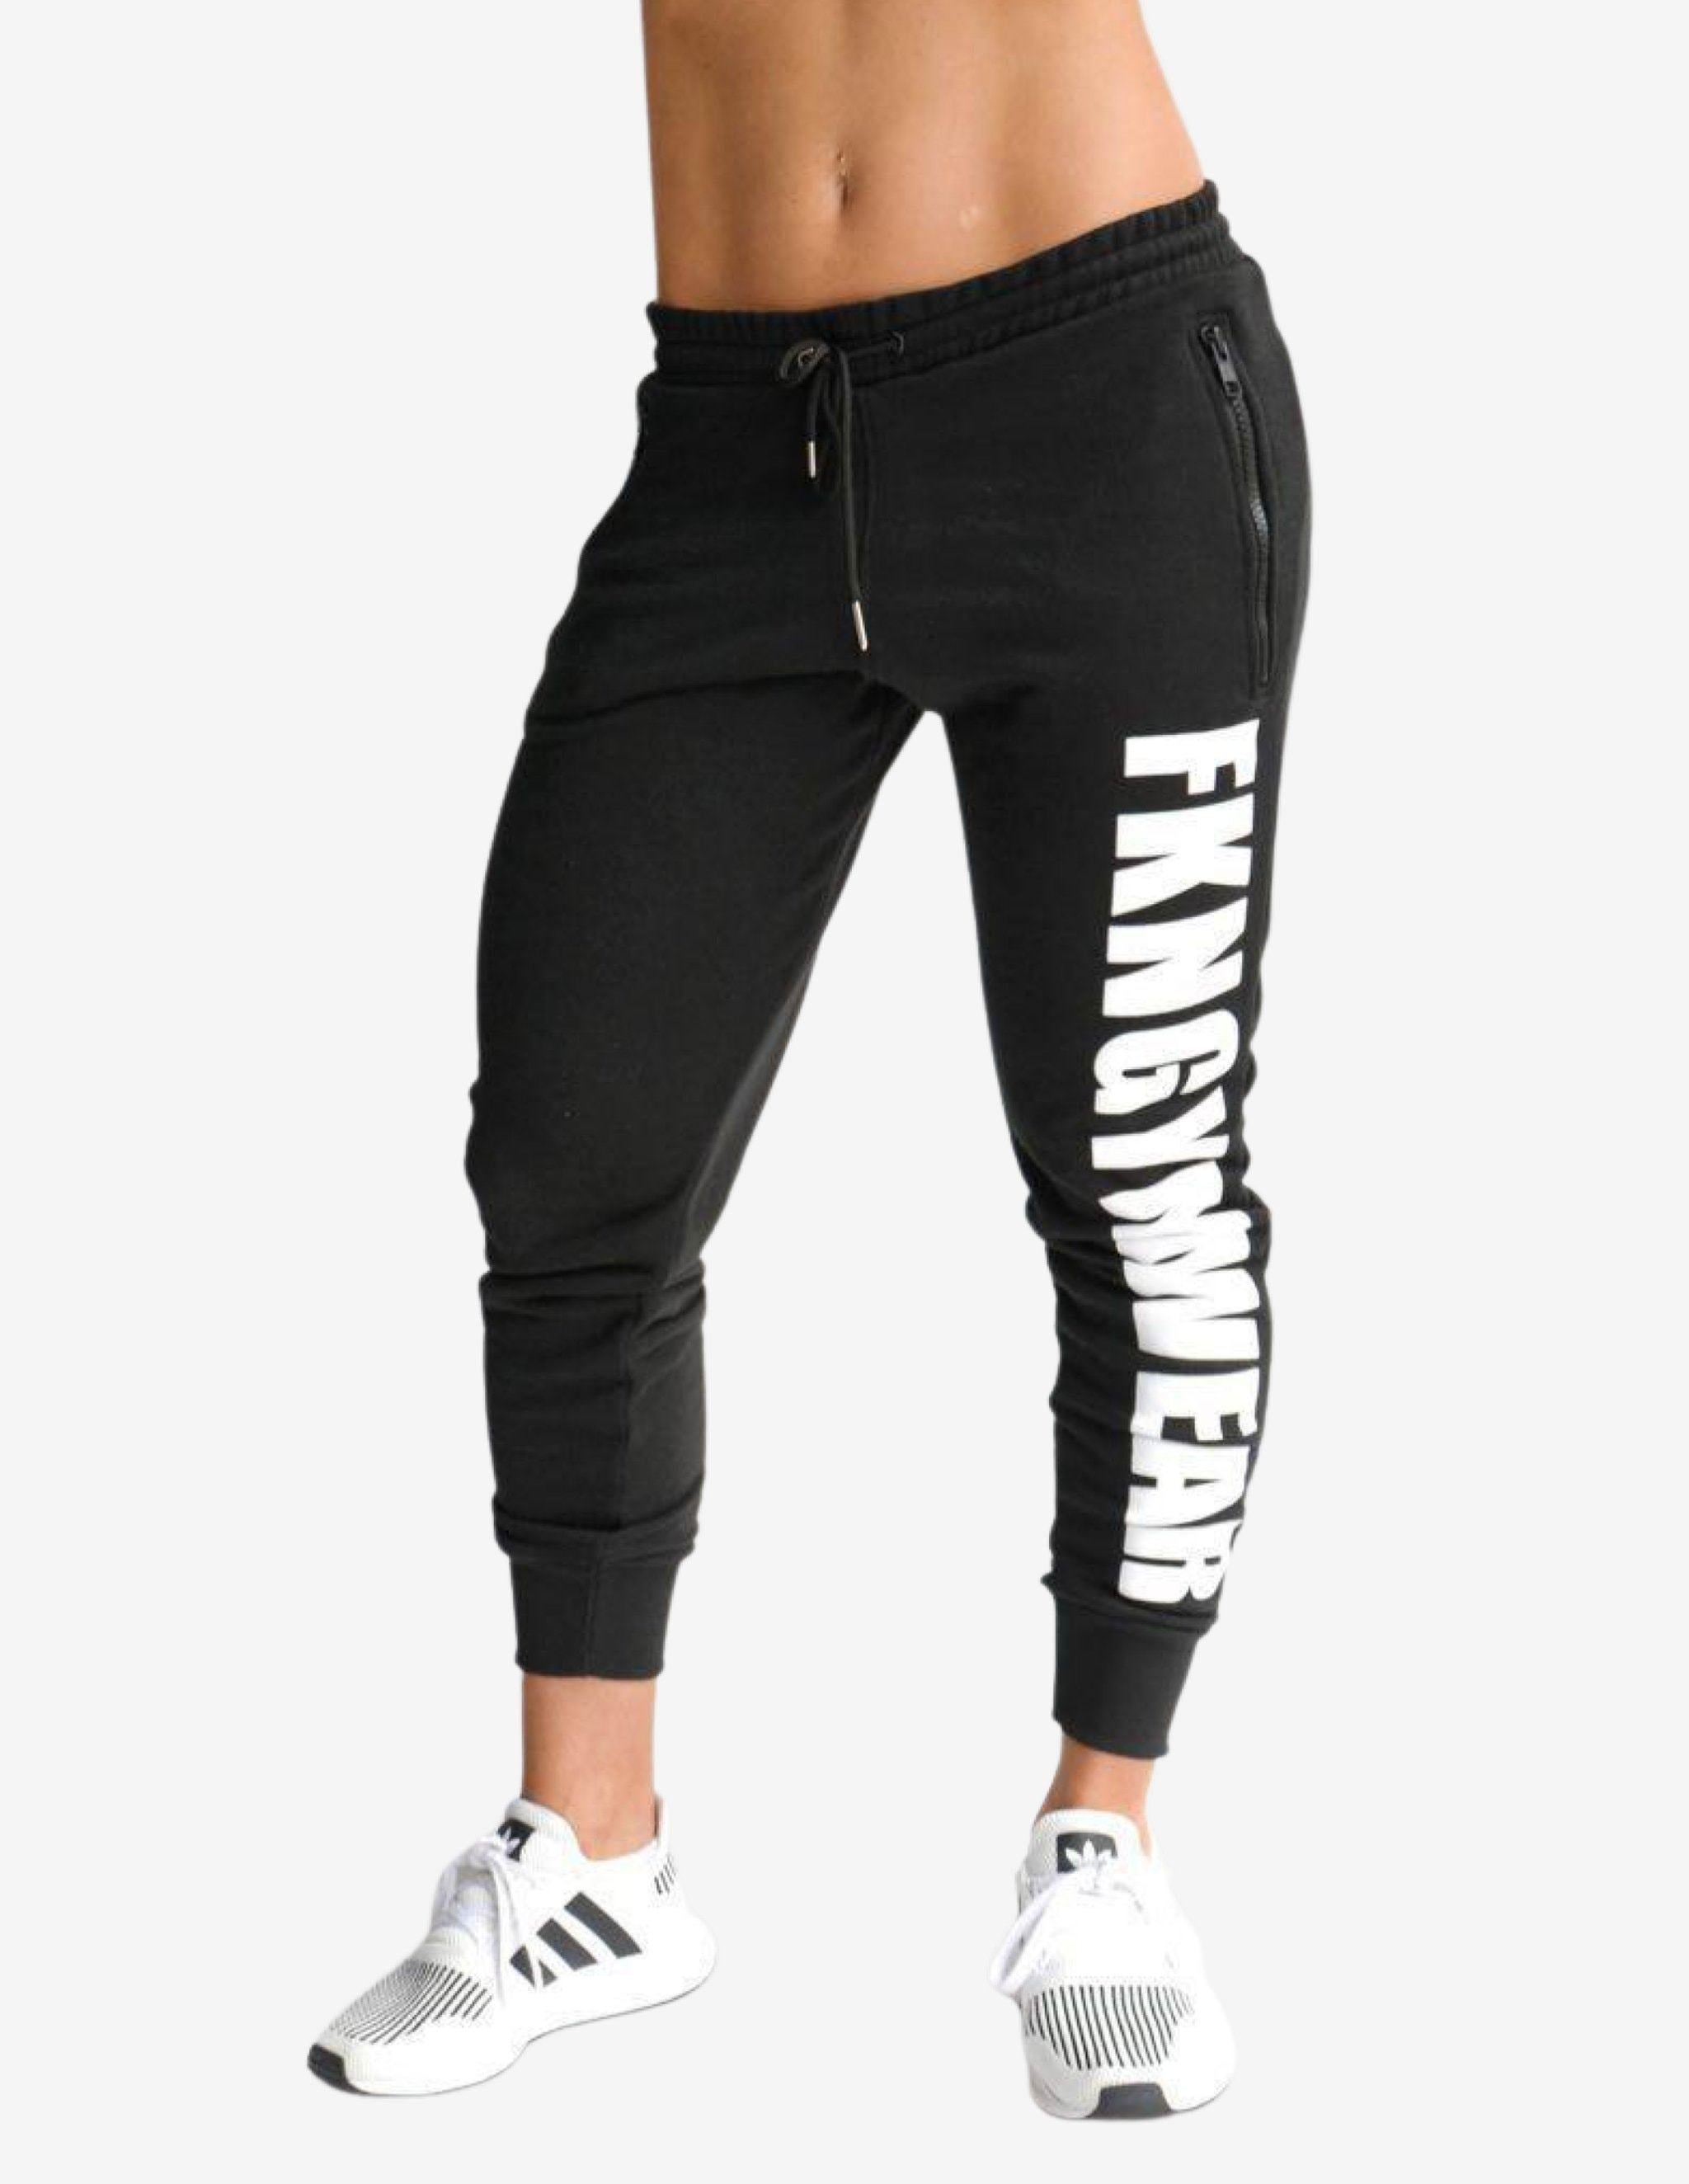 What type of track pants should I wear to a gym  Quora